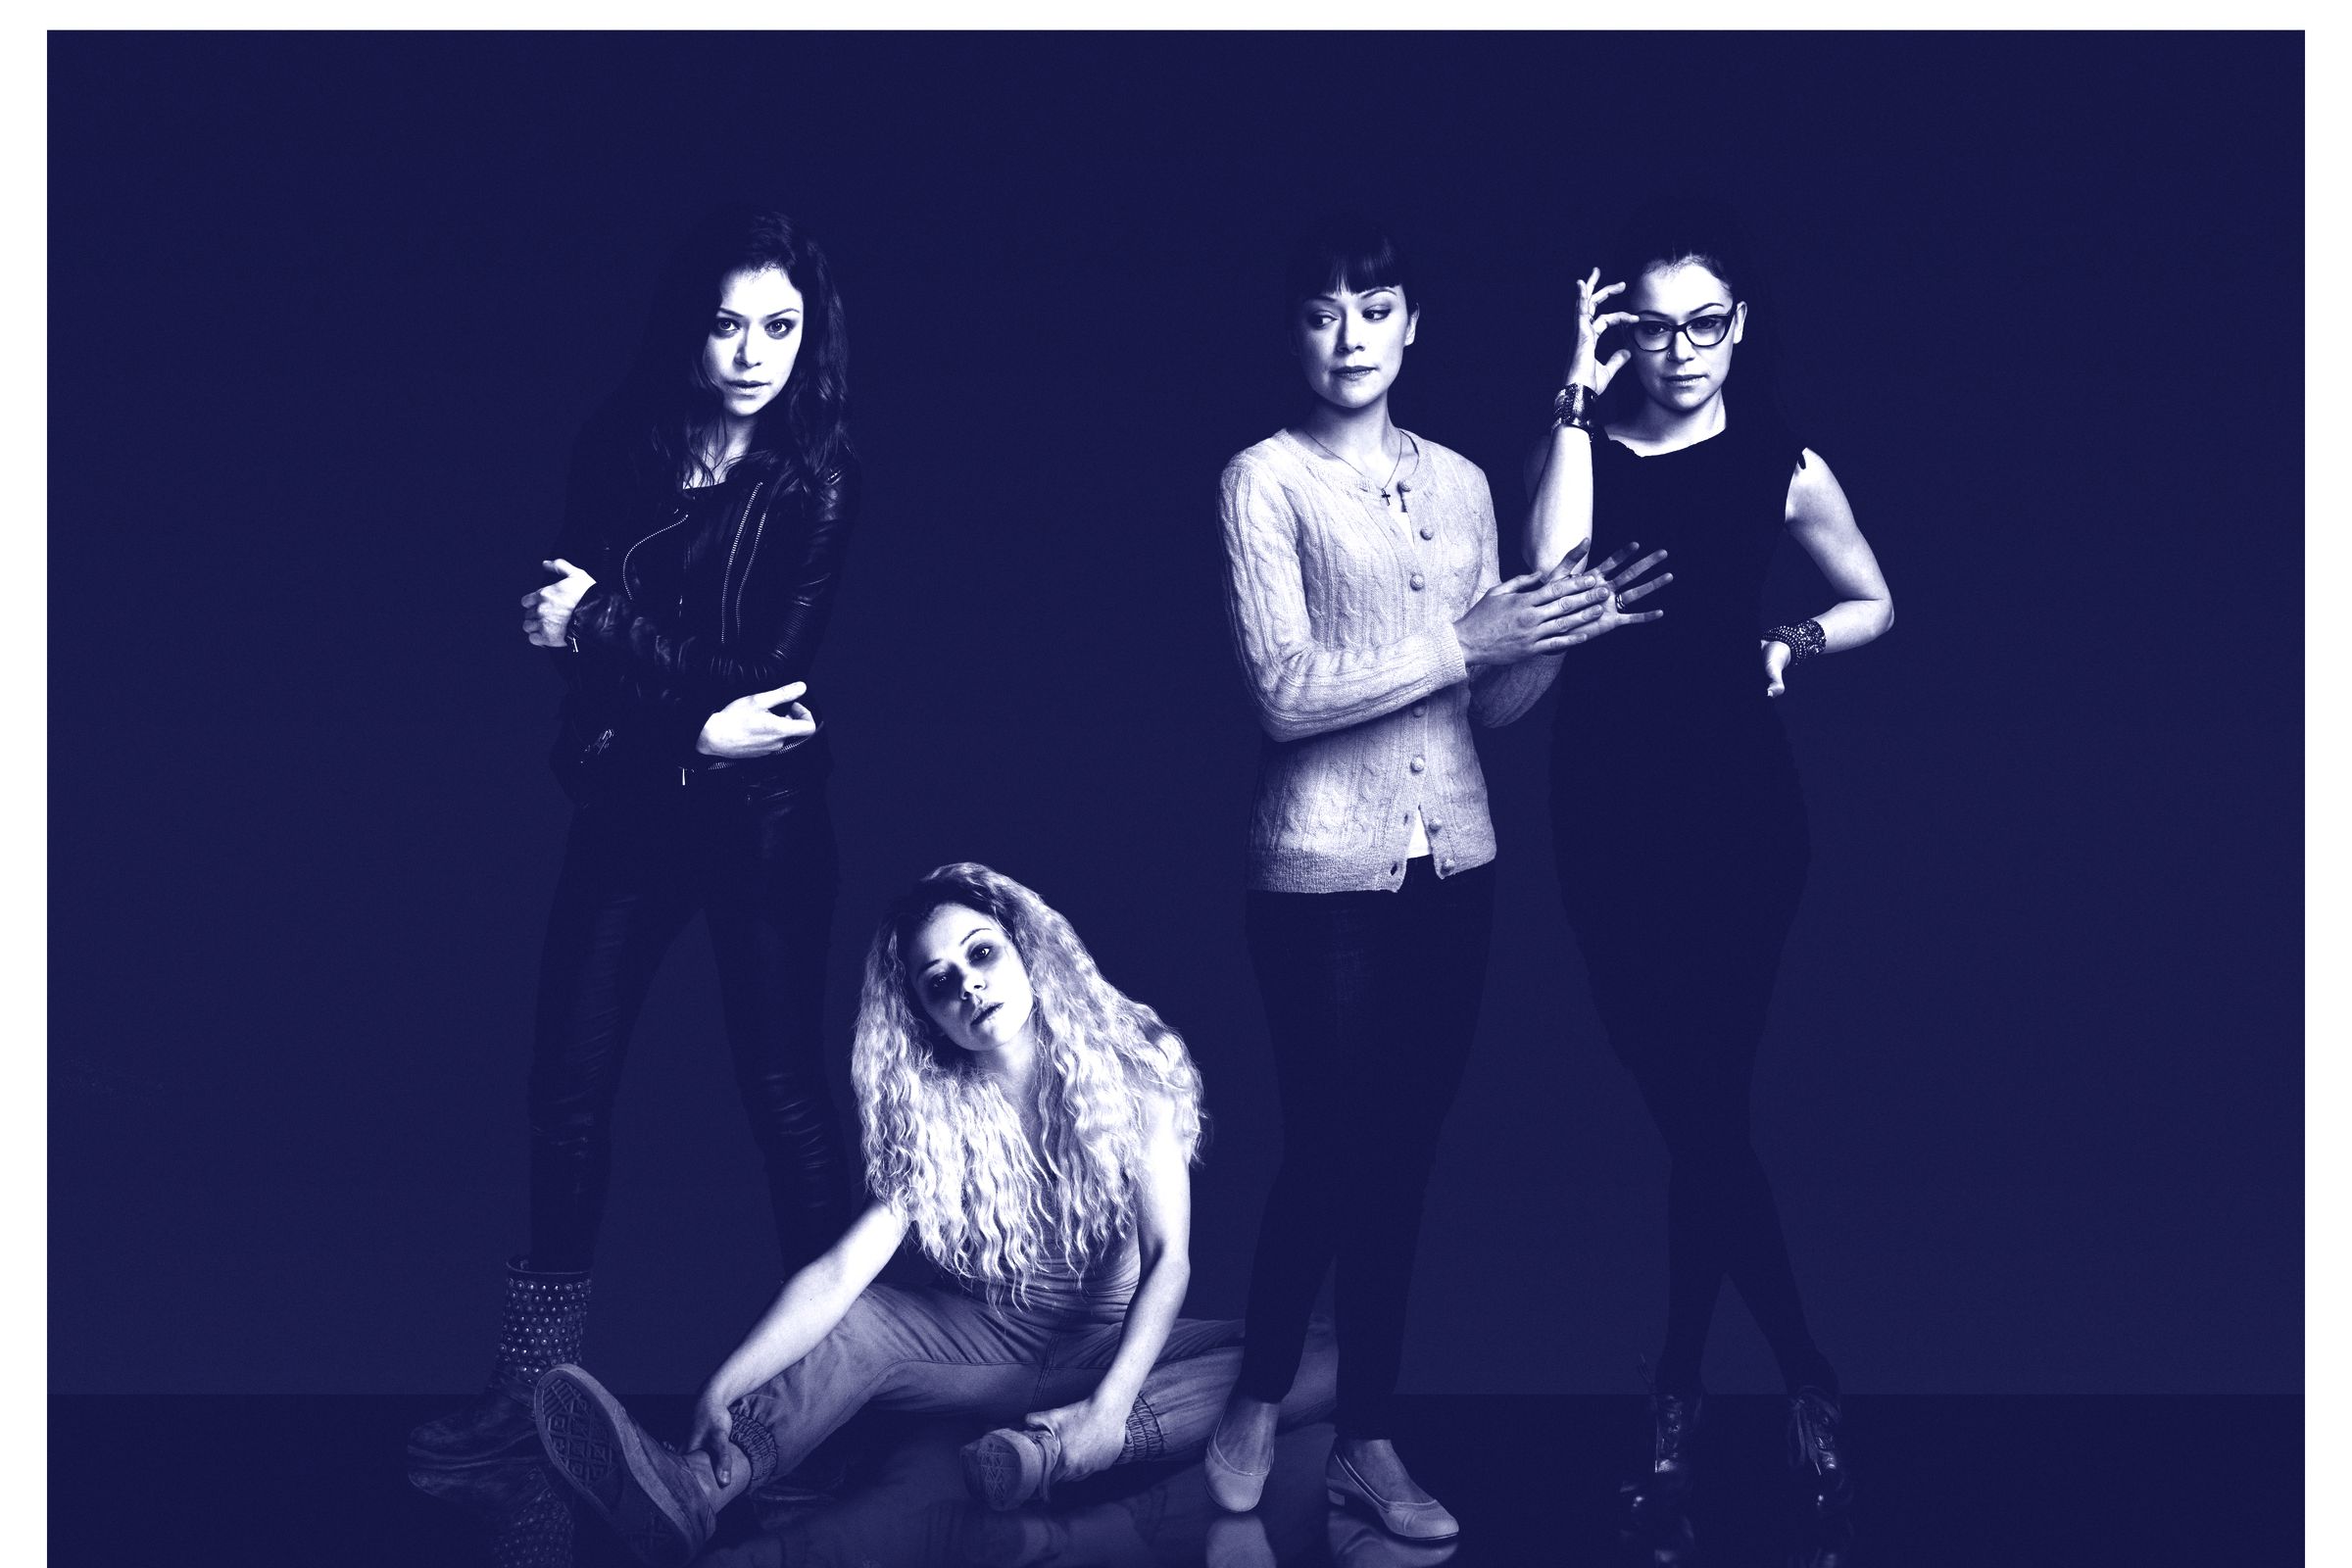 Four of Orphan Black’s clone protagonists.